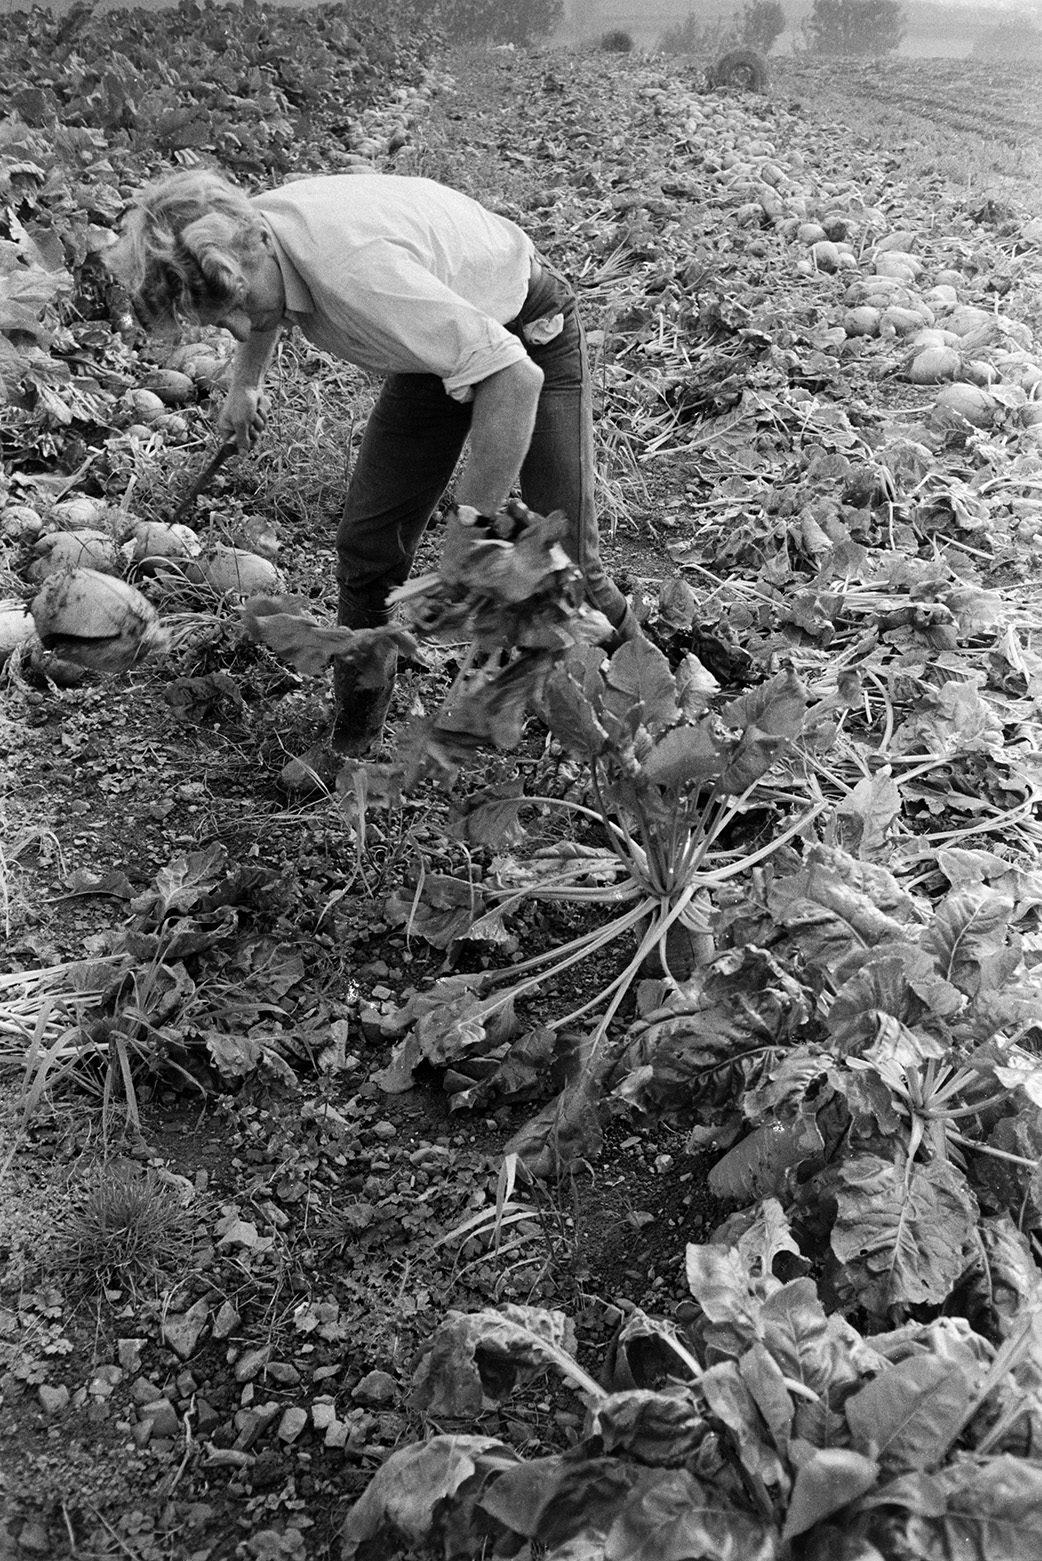 Ivor Bourne harvesting a crop of mangel wurzels by hand in a field at Mill Road Farm, Beaford. He is using a knife. The farm was also known as Jeffrys.